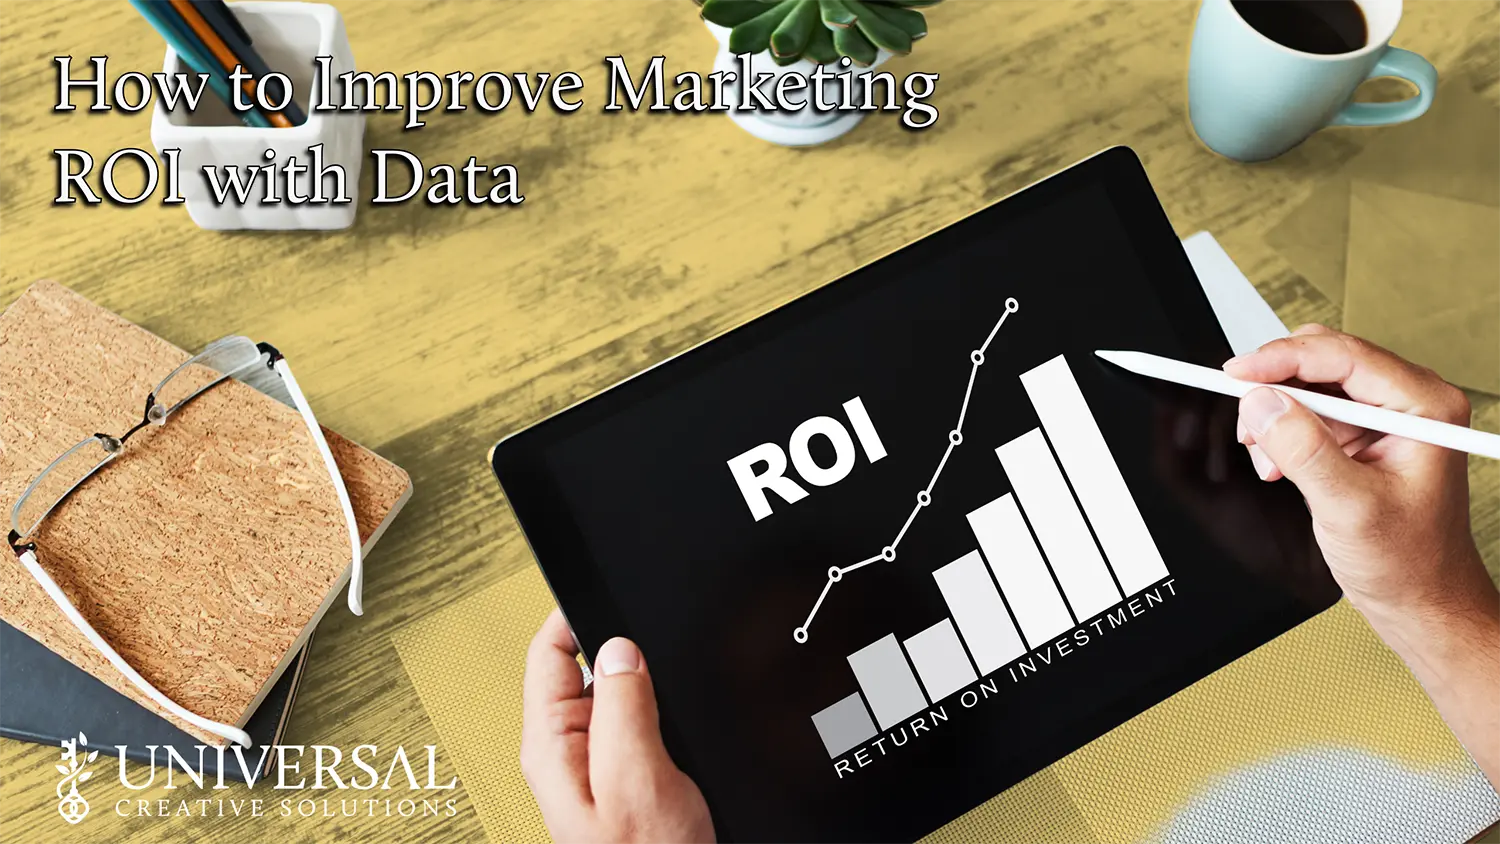 How to Improve Marketing ROI with Data